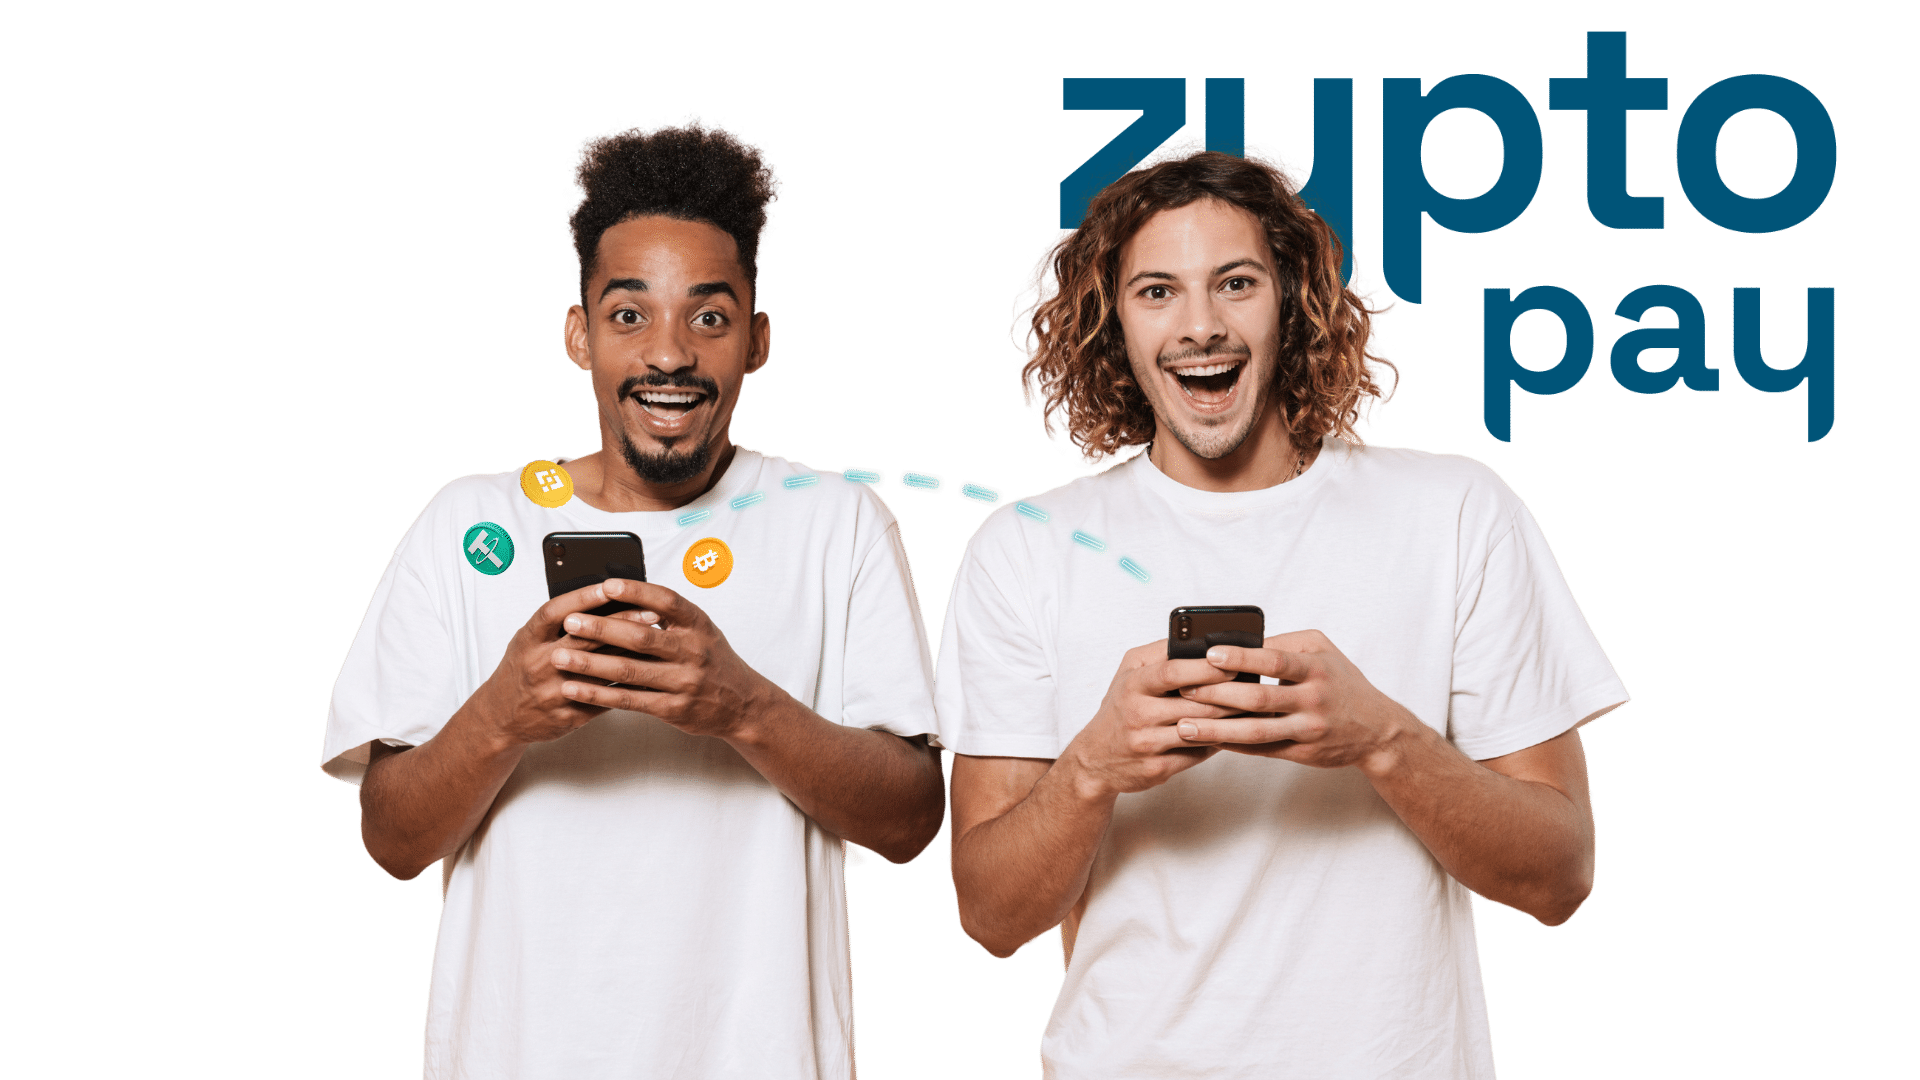 Zypto Pay allows you companies of all types and sizes to accept cryptocurrency as payment more easily than ever.